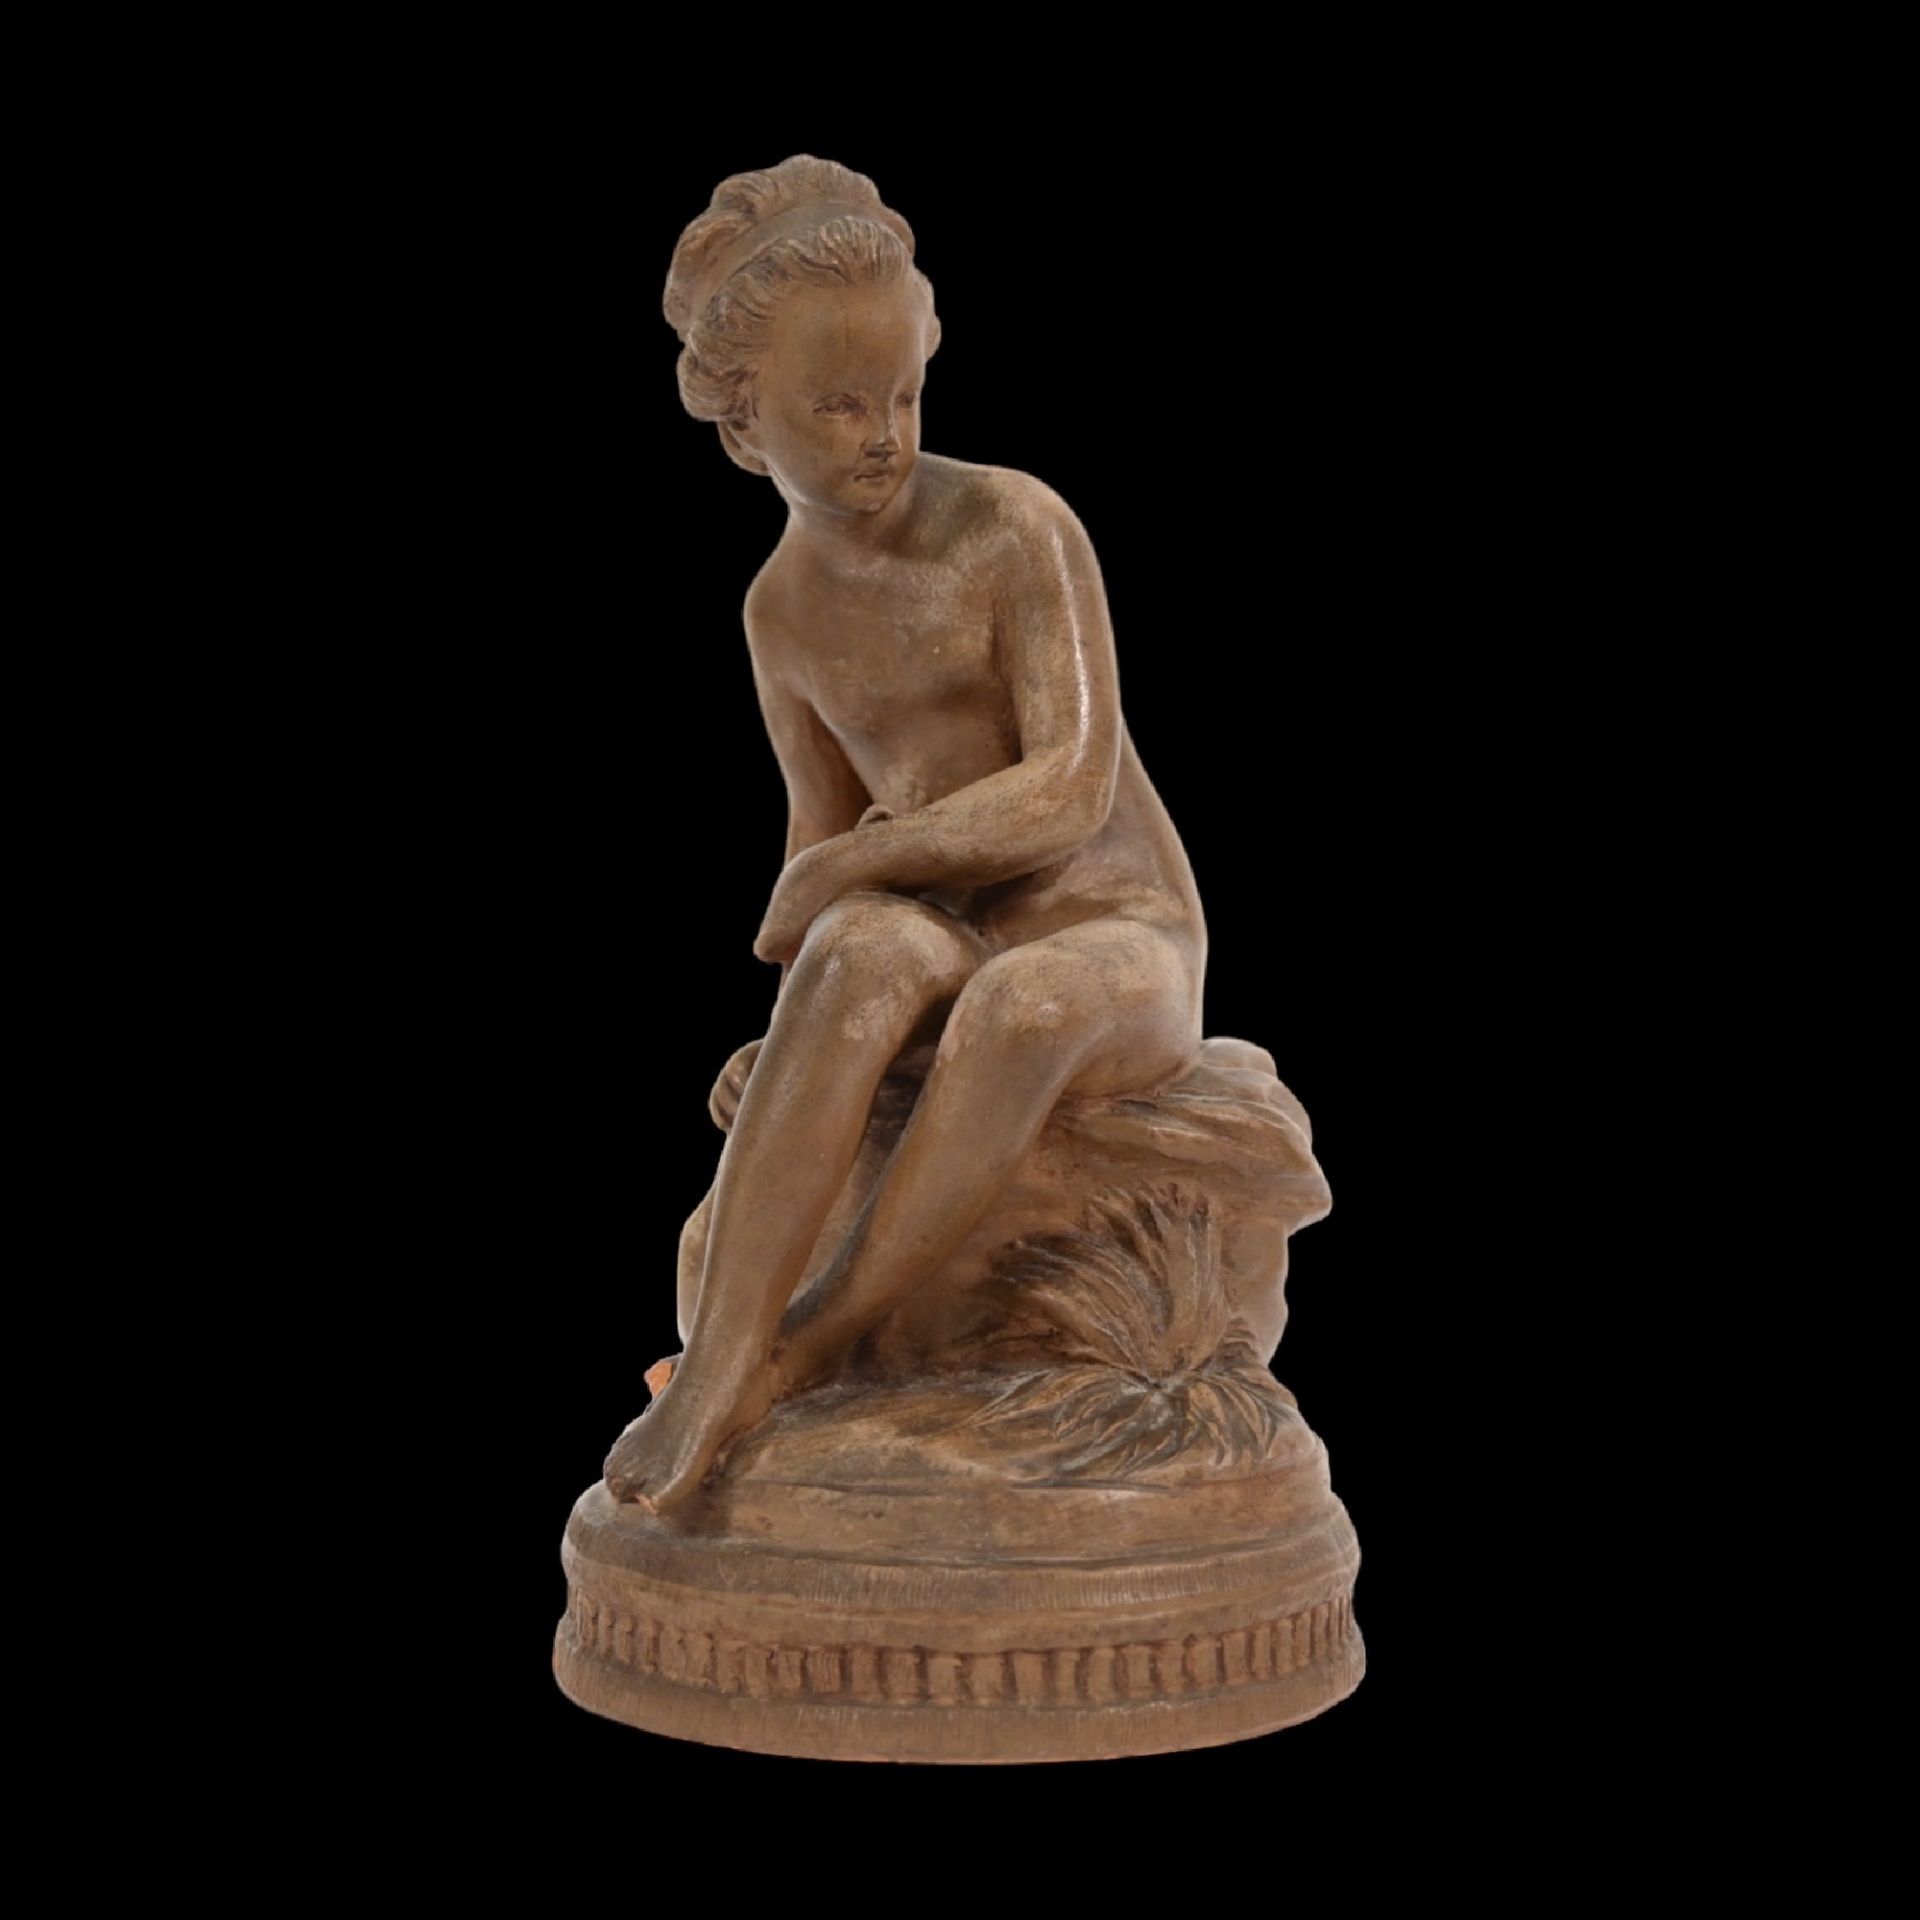 Etienne Maurice FALCONET (1716-1791), "YOUNG NAKED WOMAN" signet "Falconet". France, 18th century.